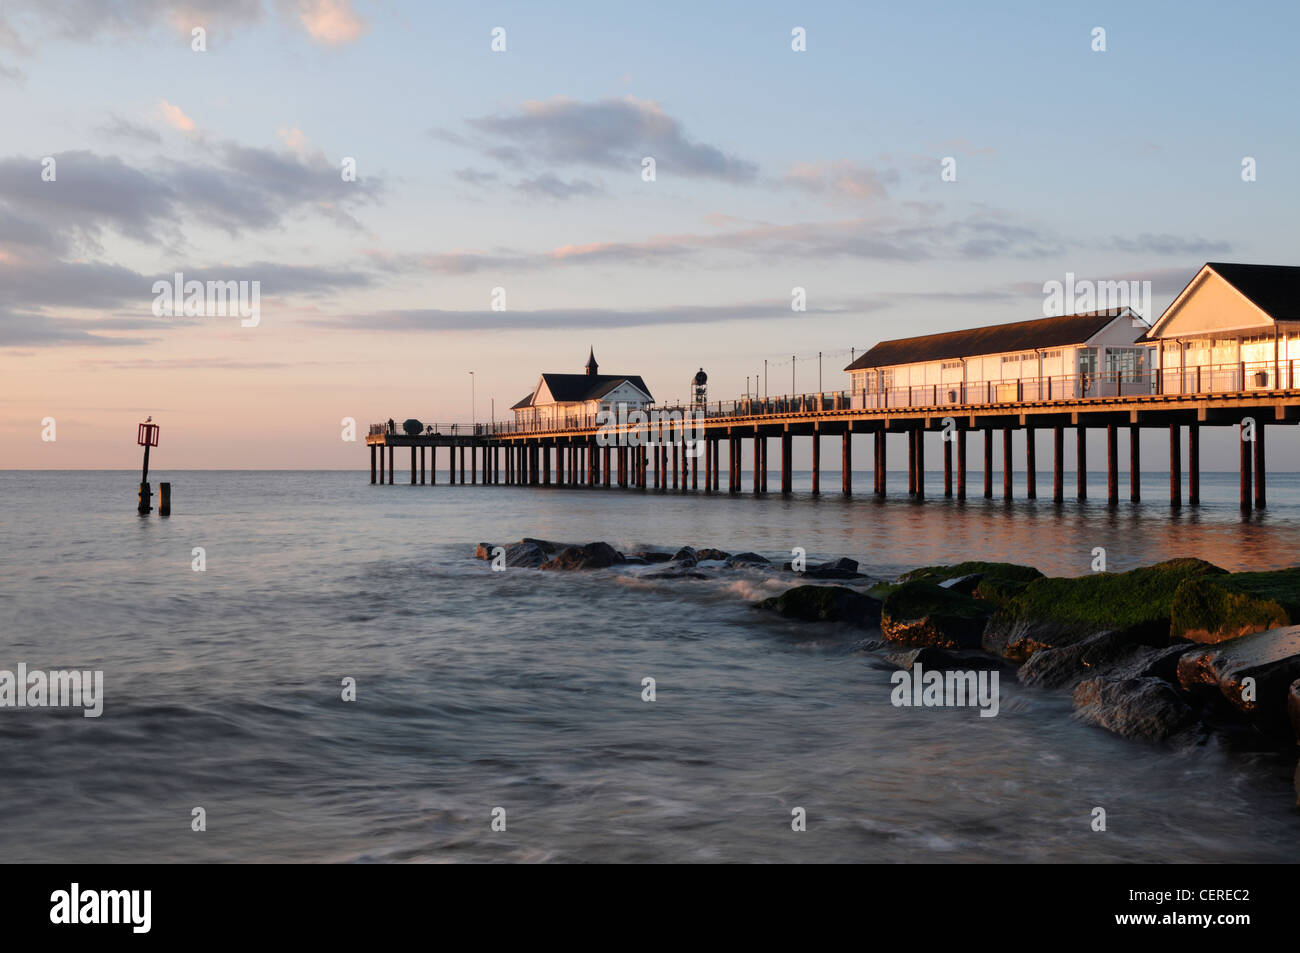 Southwold Pier at sunrise. The pier was originally constructed in 1900 and was rebuilt in 2001 making it Britain's only 21st Cen Stock Photo